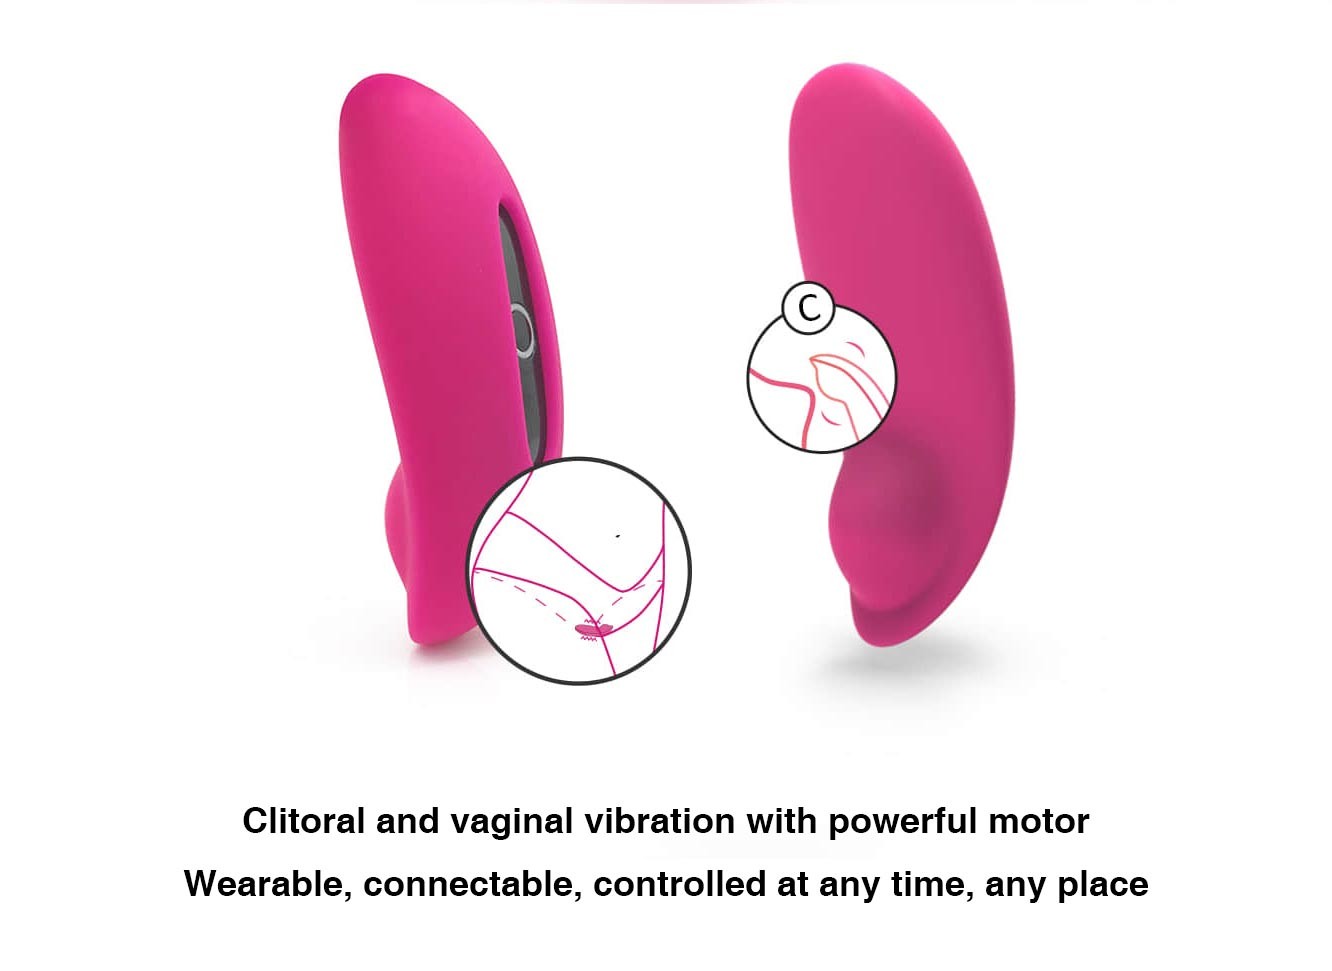 Magic Motion Candy App-controlled Wearable Vibe ss